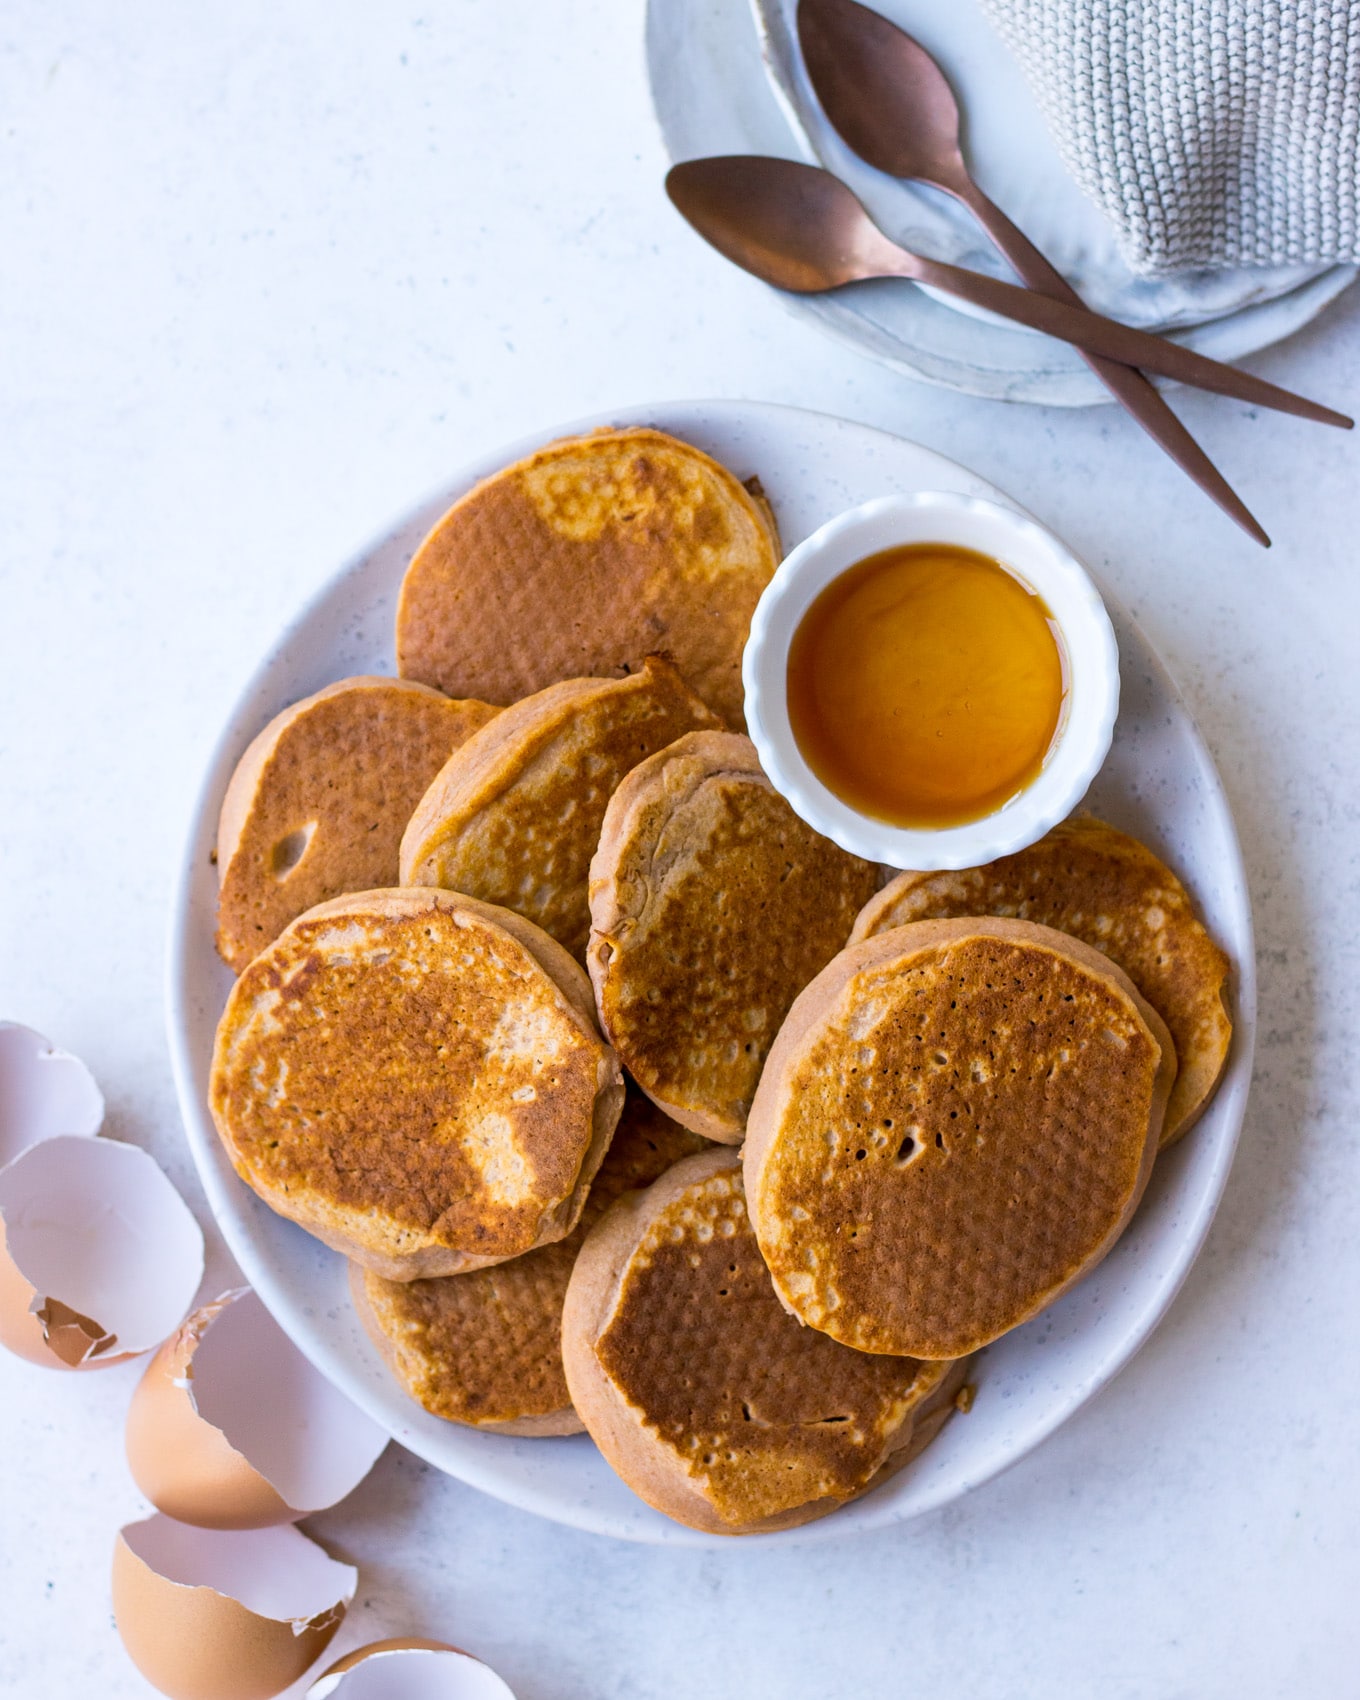 Sweet potato pikelets made with buckwheat flour on Nourish Every Day Blog